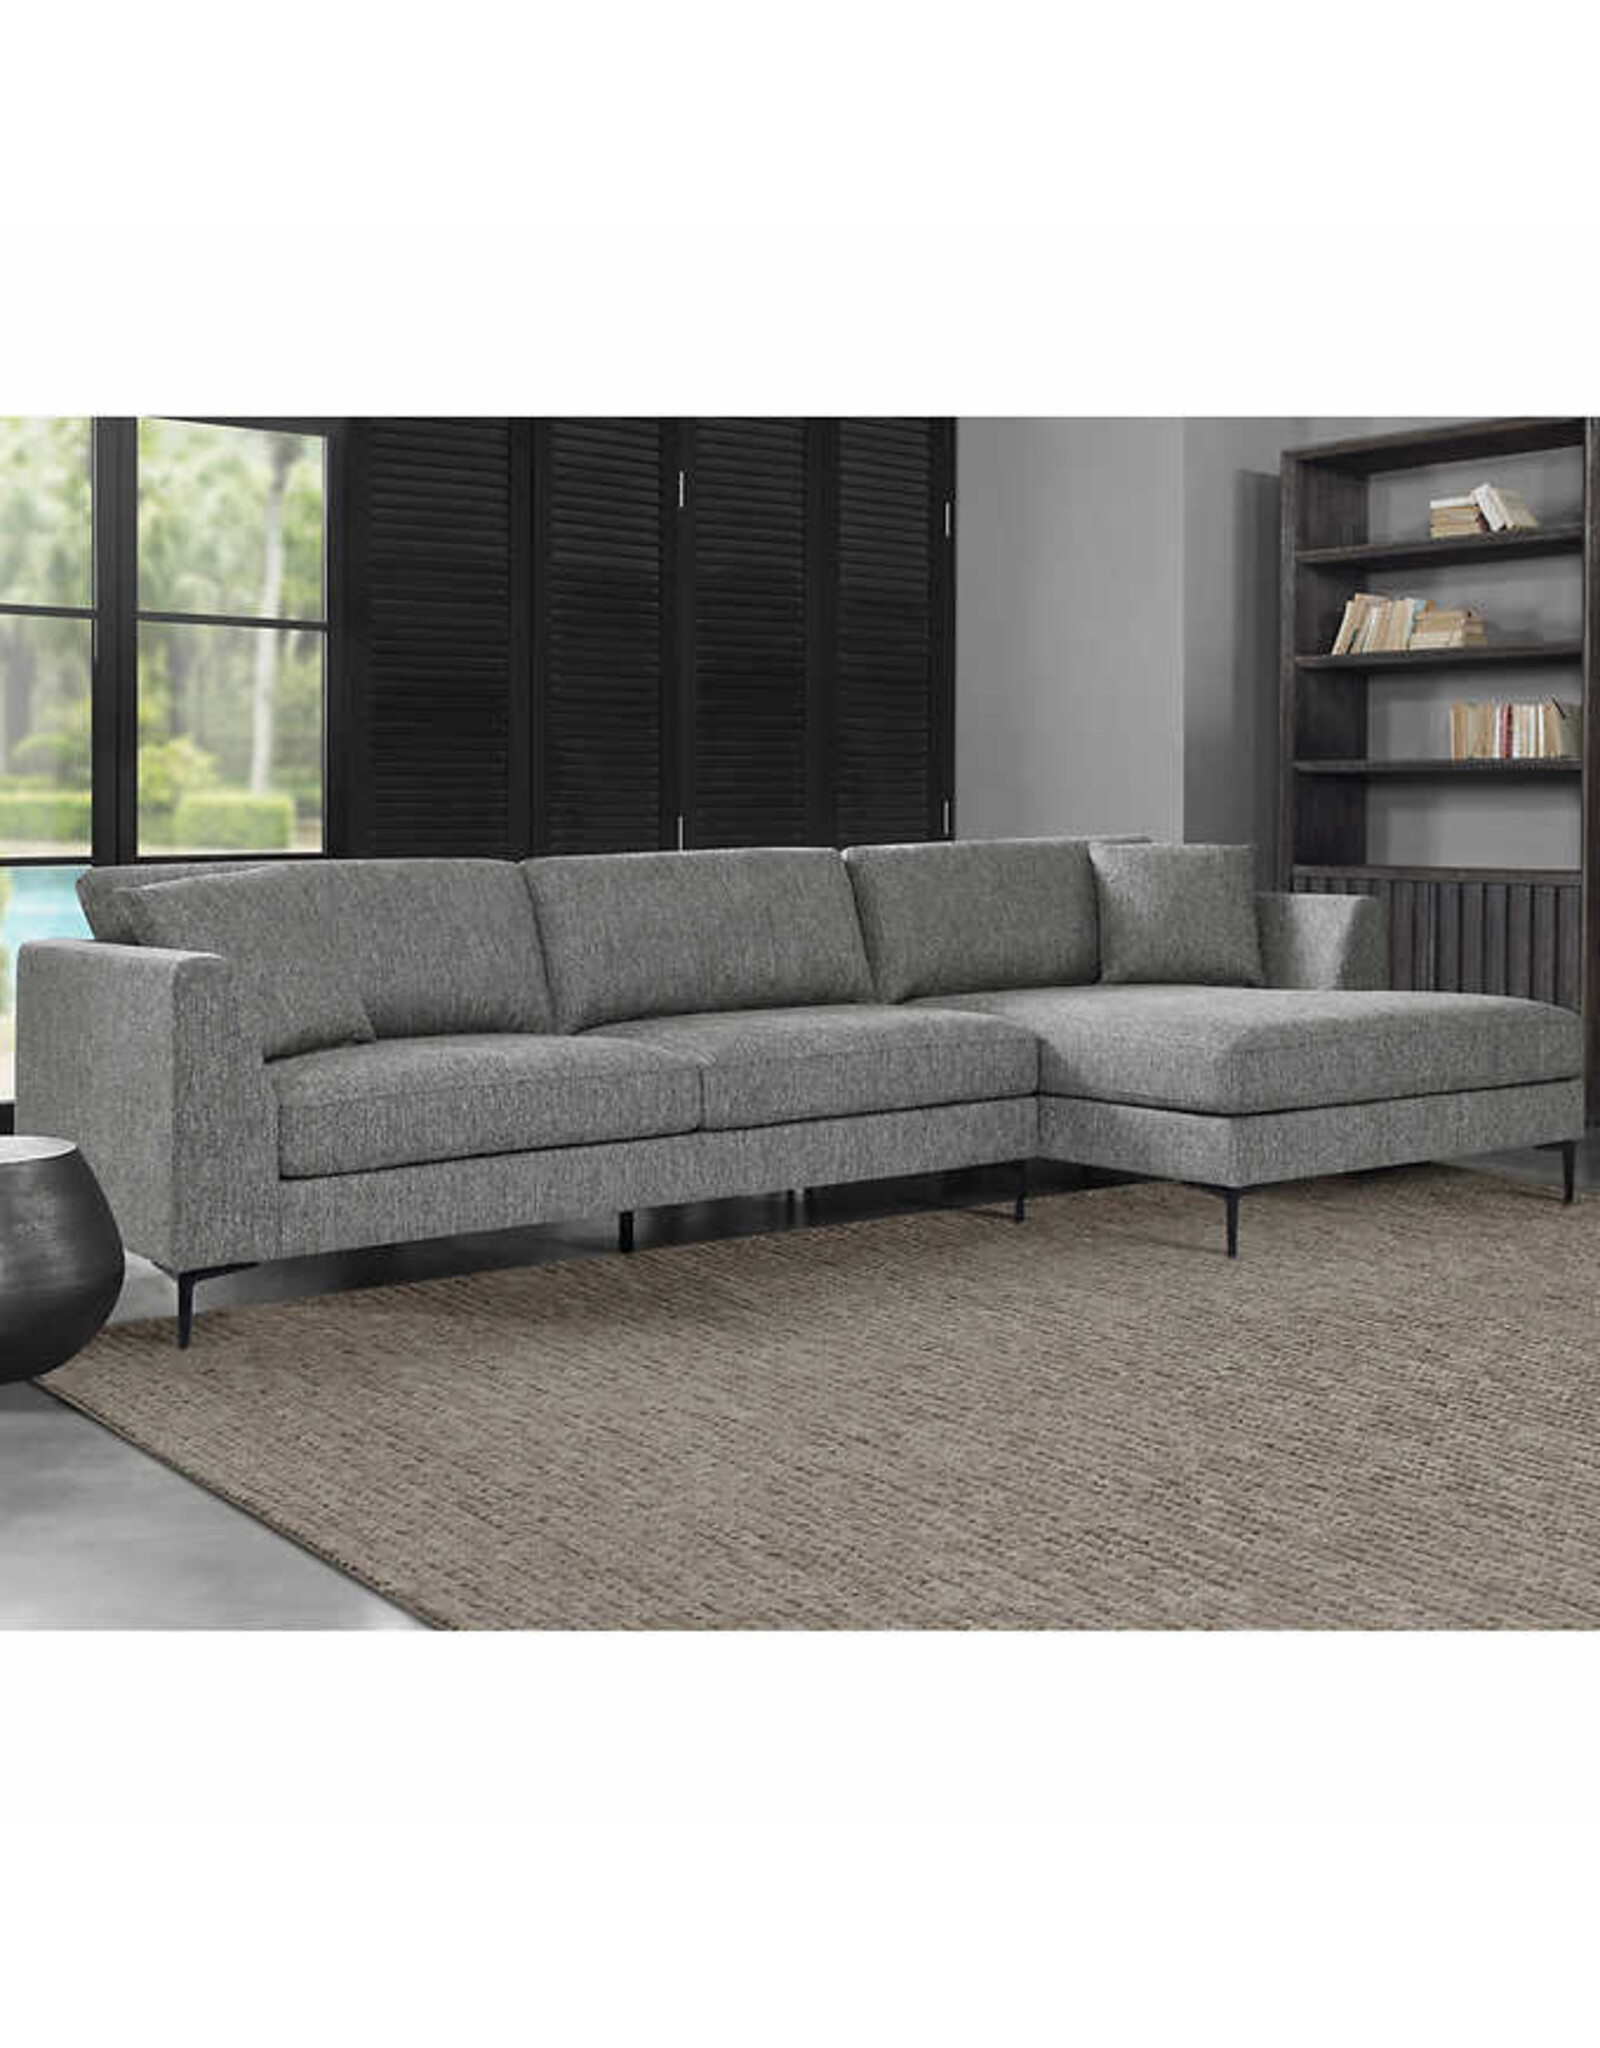 Thomasville View Larger Image 1 Thomasville Odette 2-piece Fabric Sectional